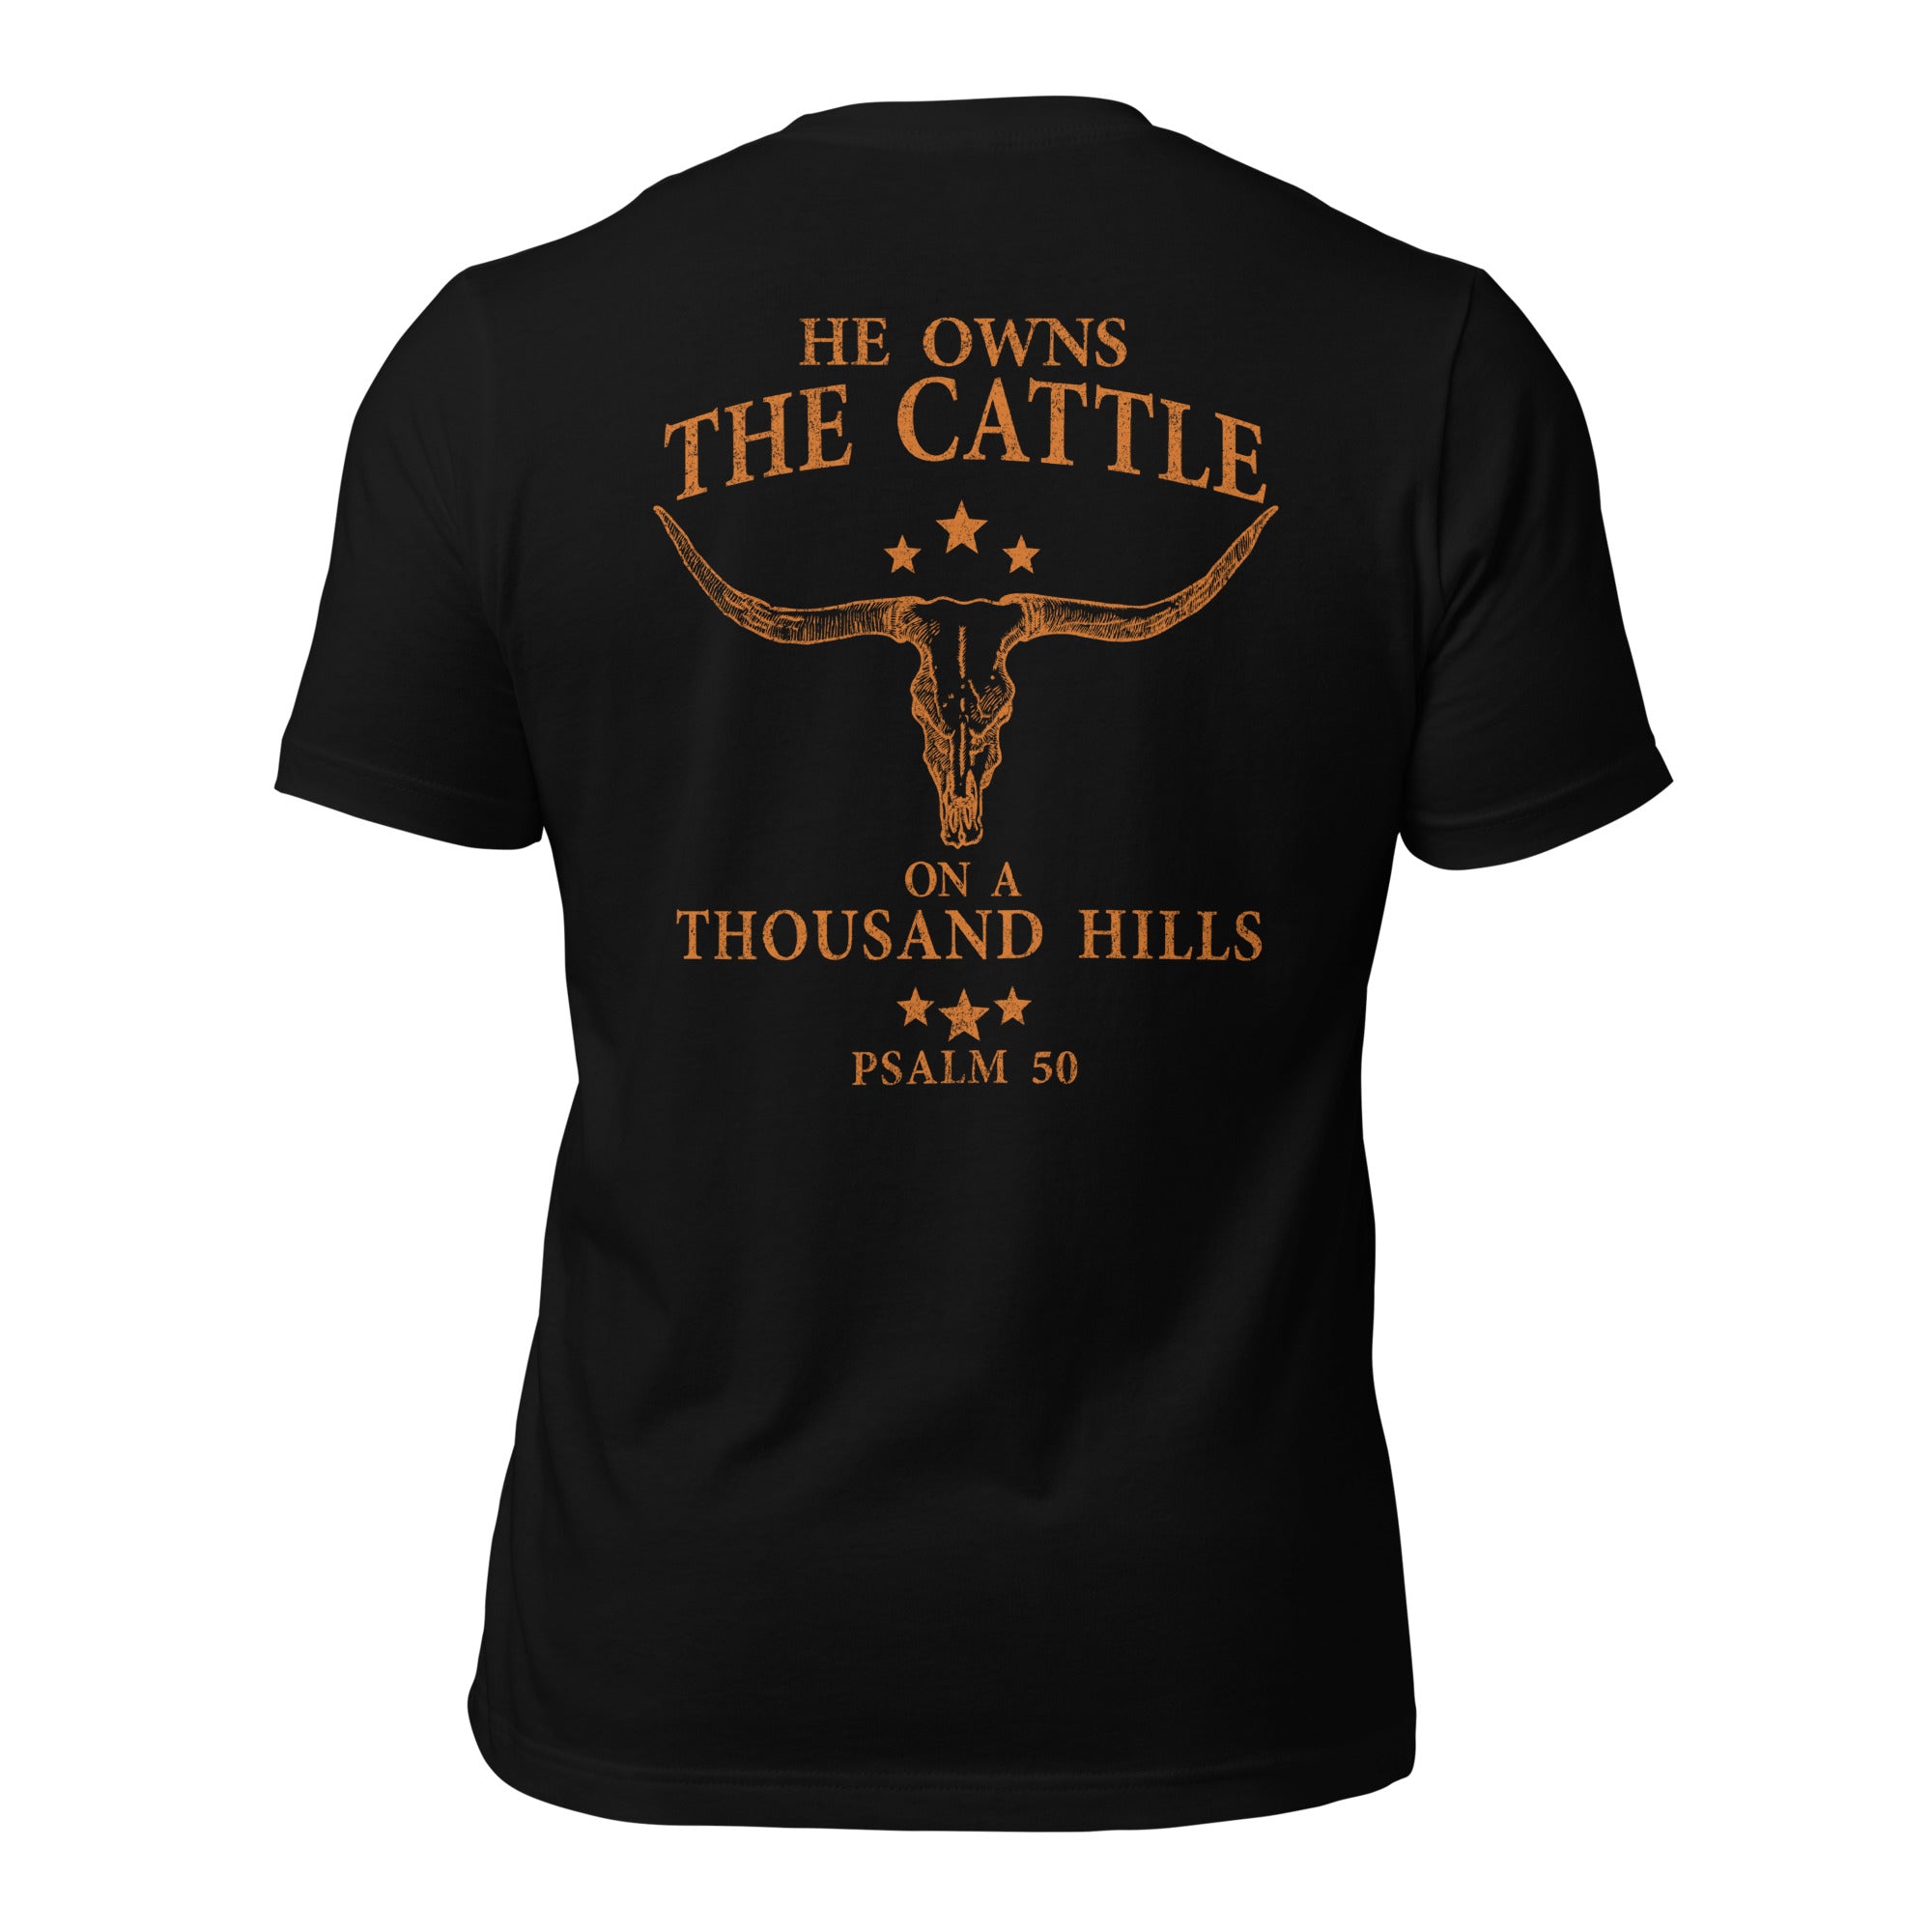 He owns the cattle on a thousand hills Tee